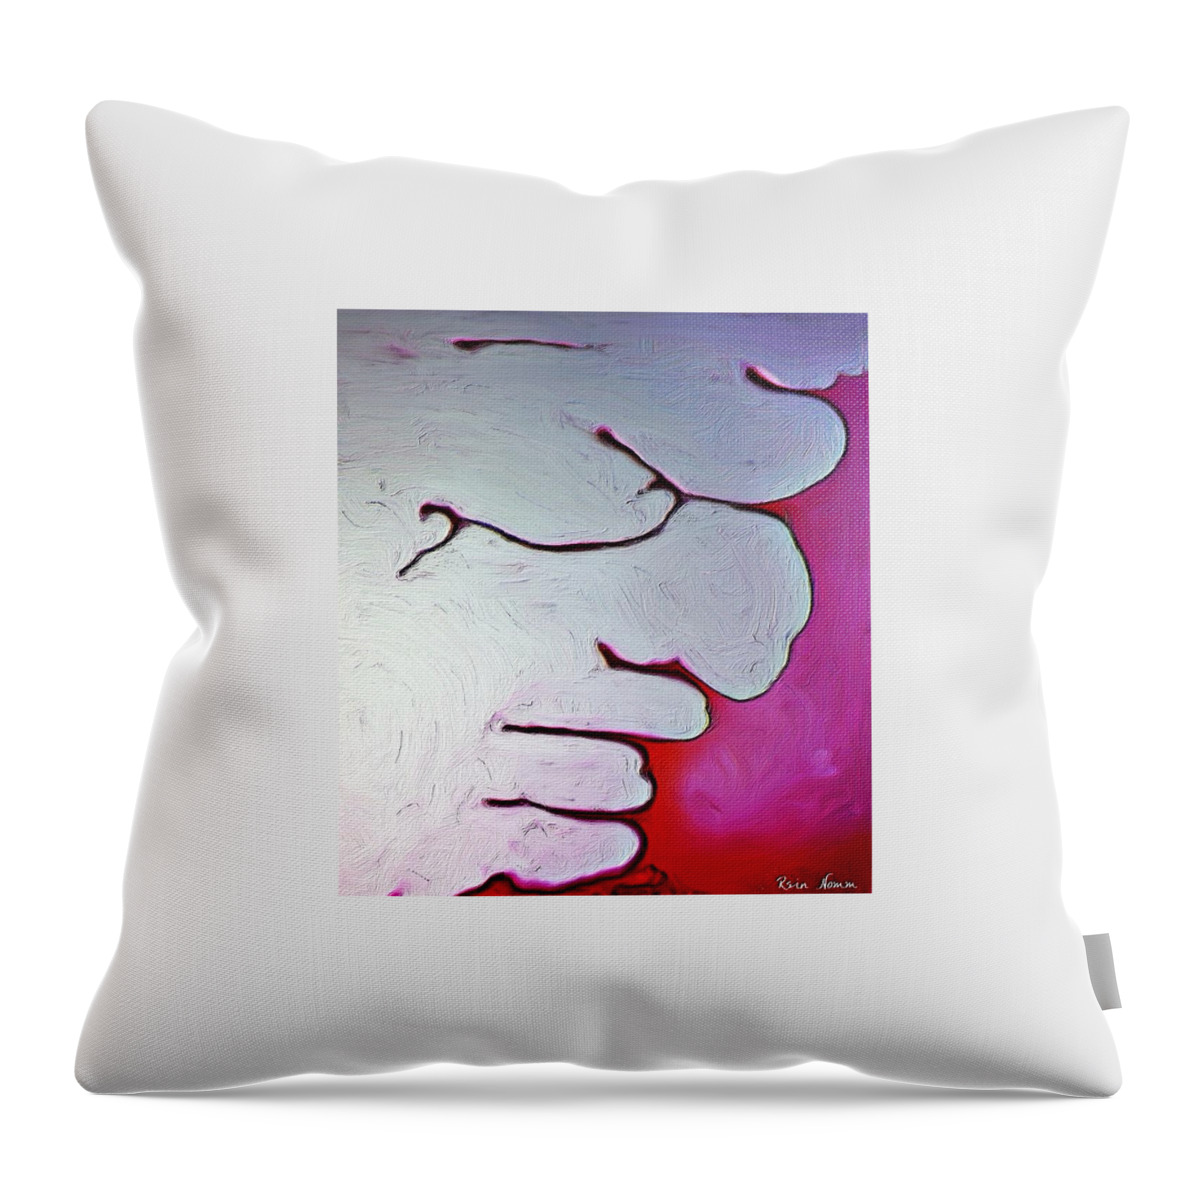  Throw Pillow featuring the digital art Over Stepping by Rein Nomm